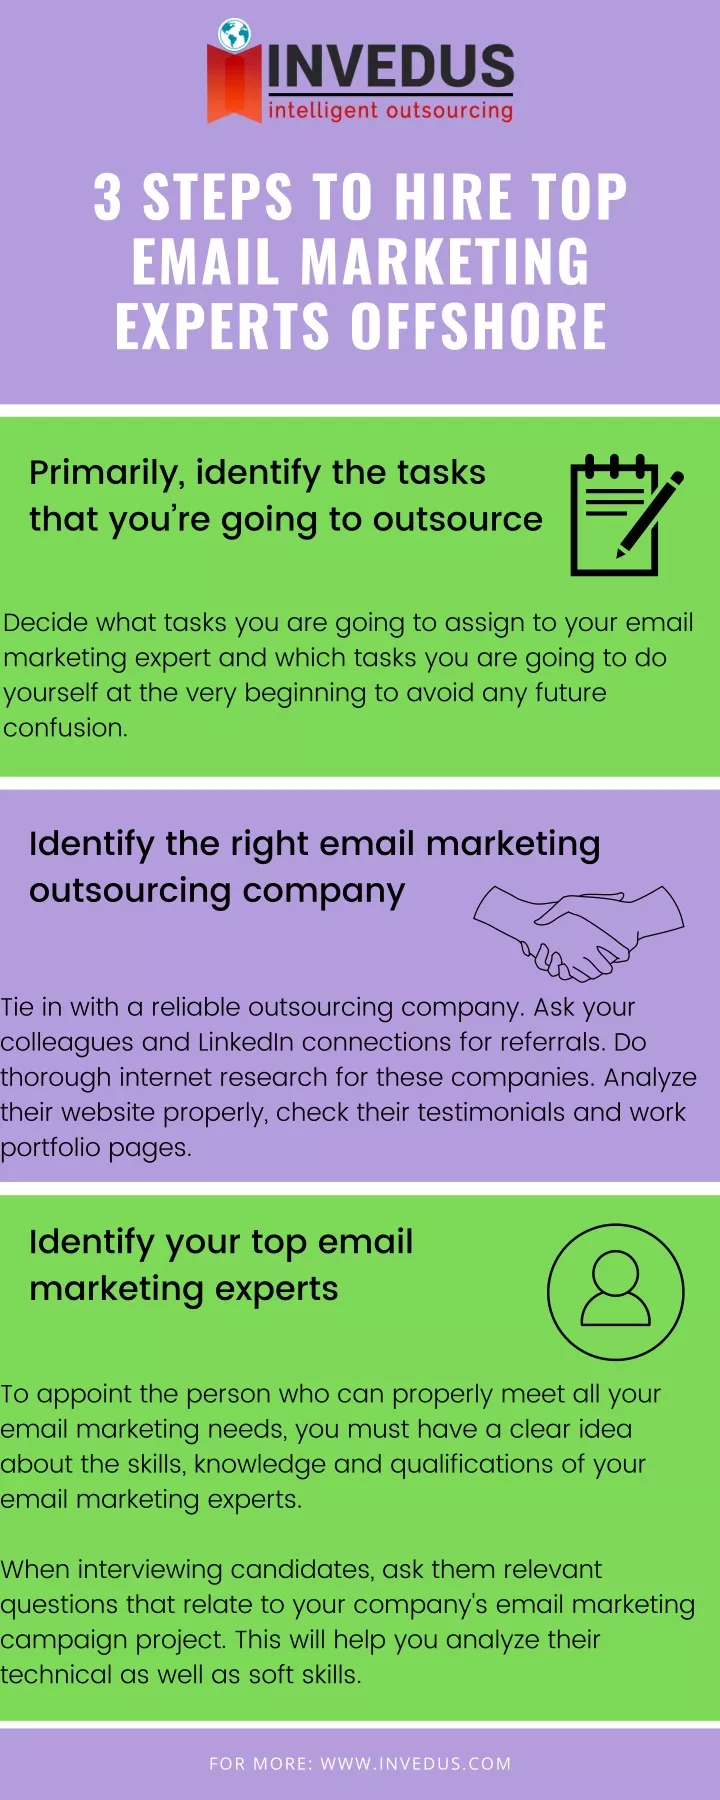 3 steps to hire top email marketing experts